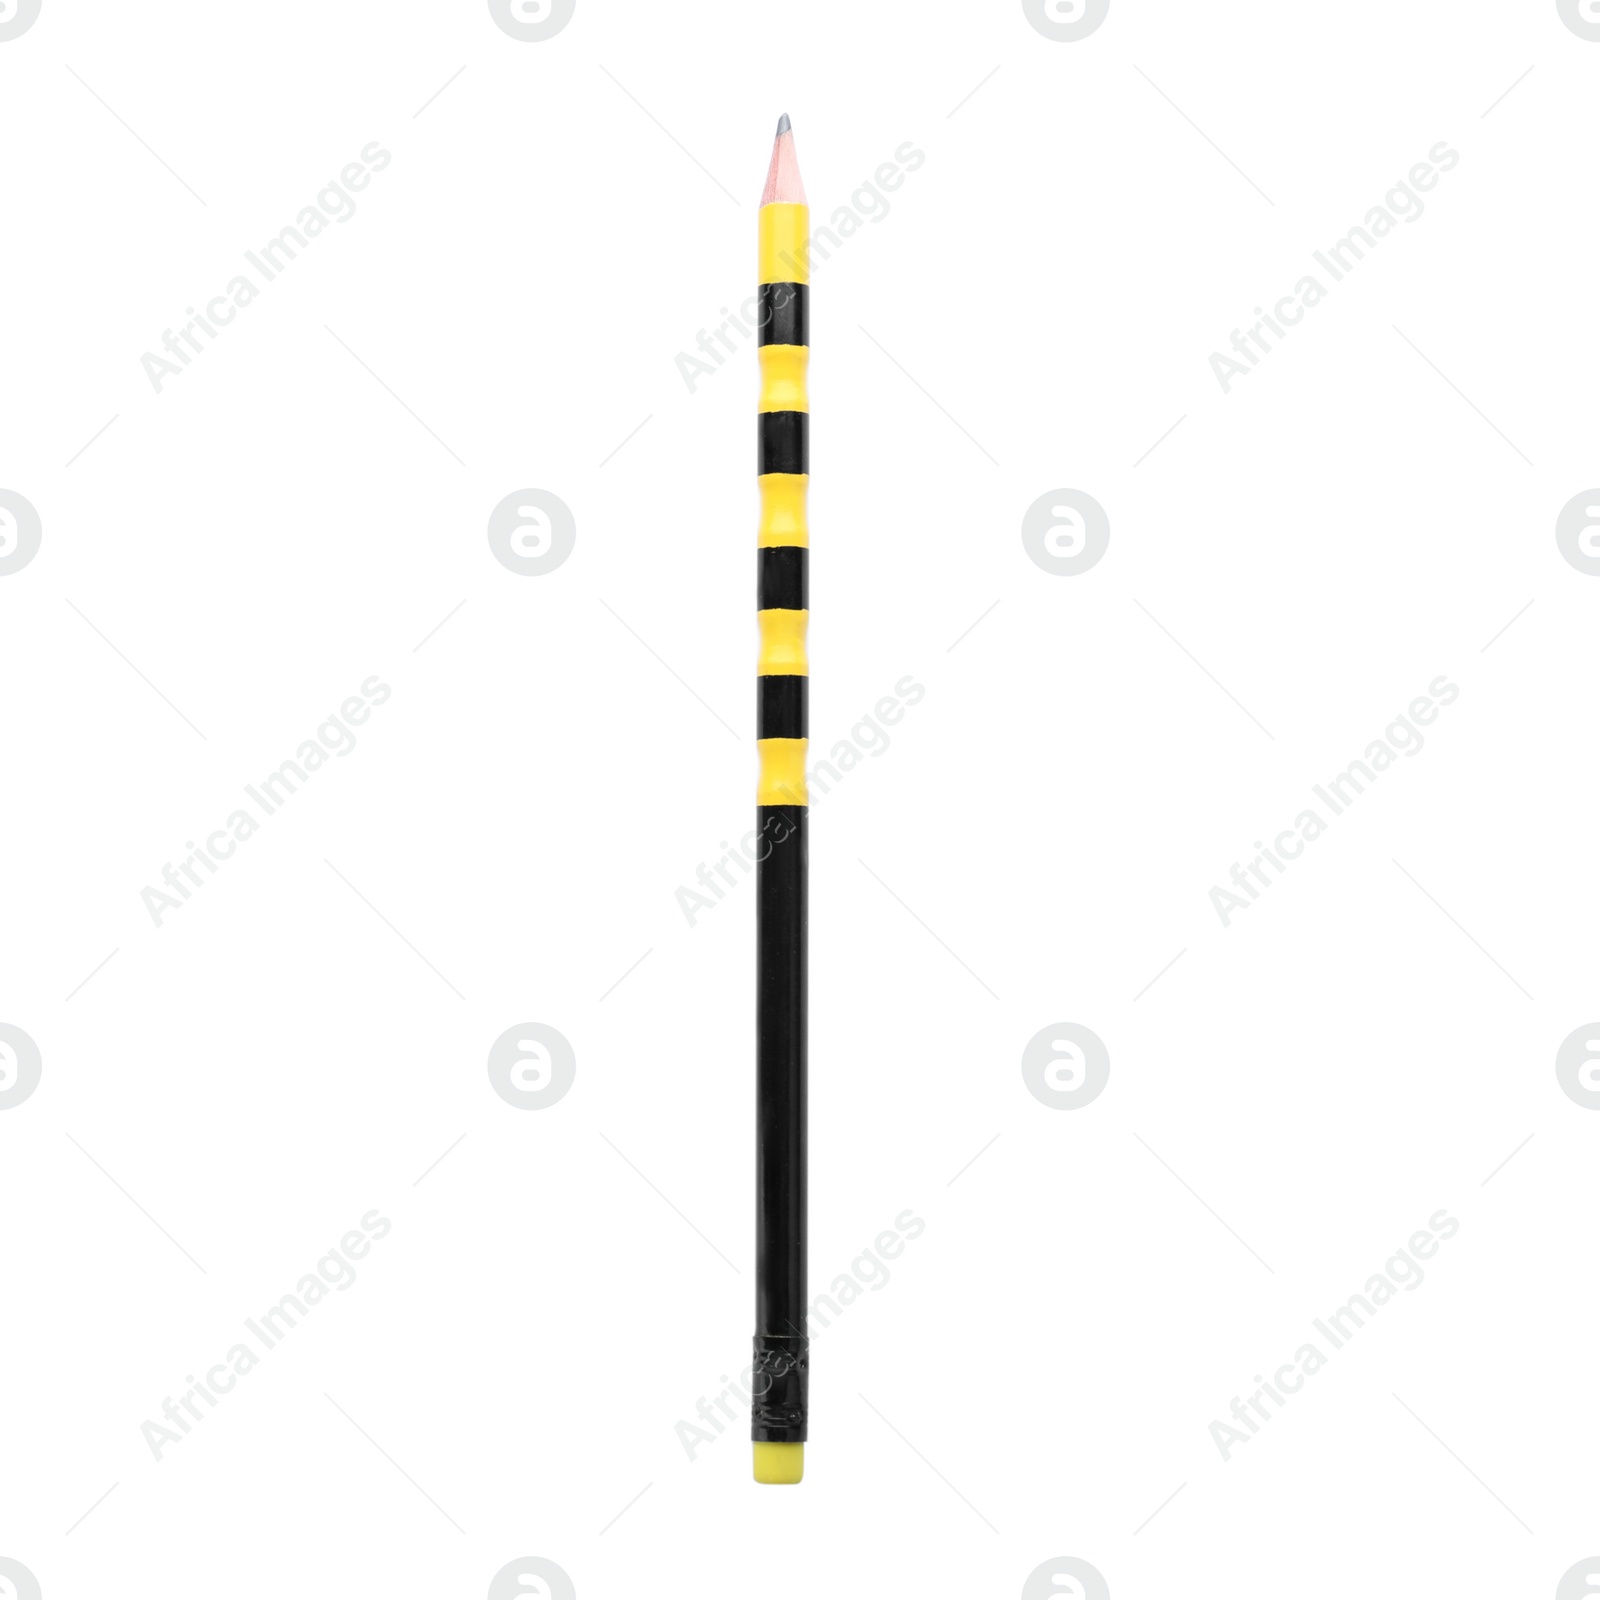 Photo of New pencil isolated on white. School stationery